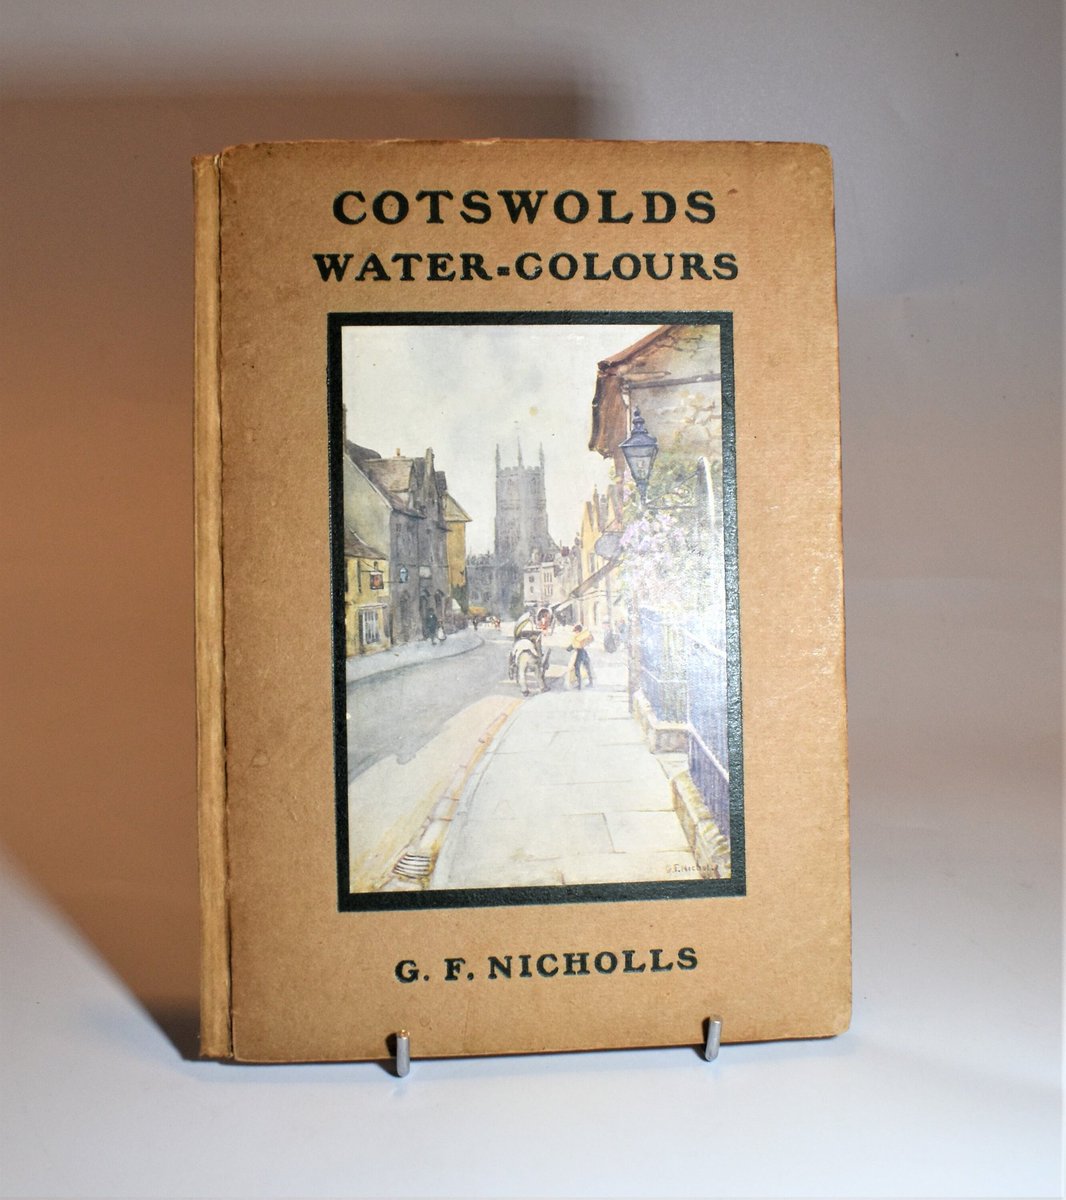 Lovely collection of plates. Cotswolds Water-Colours. G.F Nicholls (1920) Black (pub) Slim Antique History & Art Book. 20 Glossy Colour Plates. Collectible Decorative.
#cotswolds #antiquebooksforsale etsy.me/37UqSyB